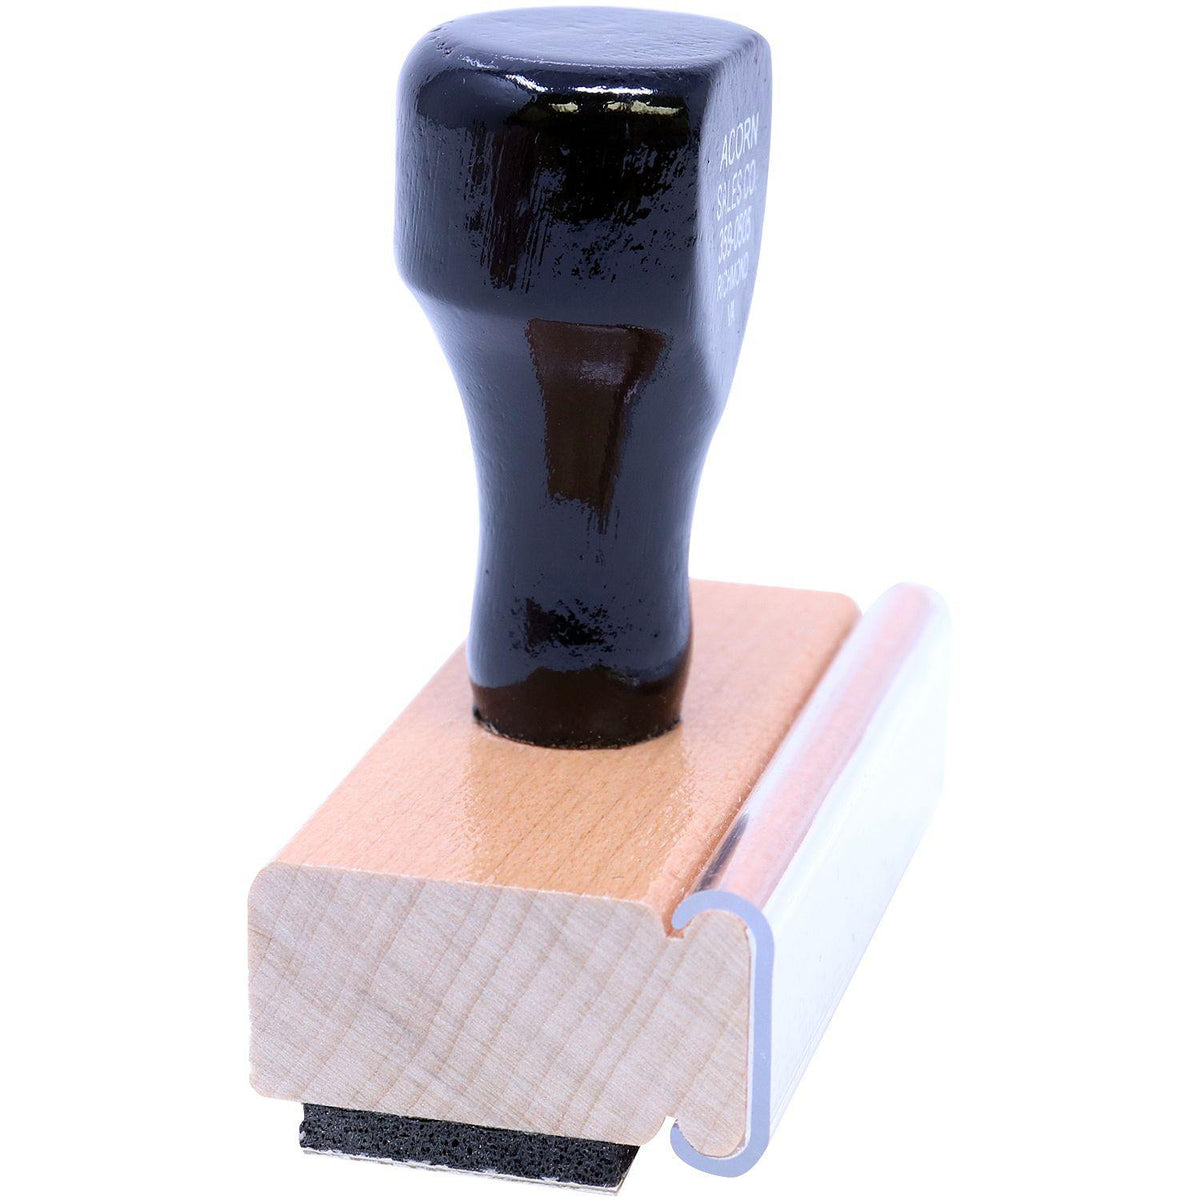 No Referral Needed Medical Rubber Stamp - Engineer Seal Stamps - Brand_Acorn, Impression Size_Small, Stamp Type_Regular Stamp, Type of Use_Medical Office